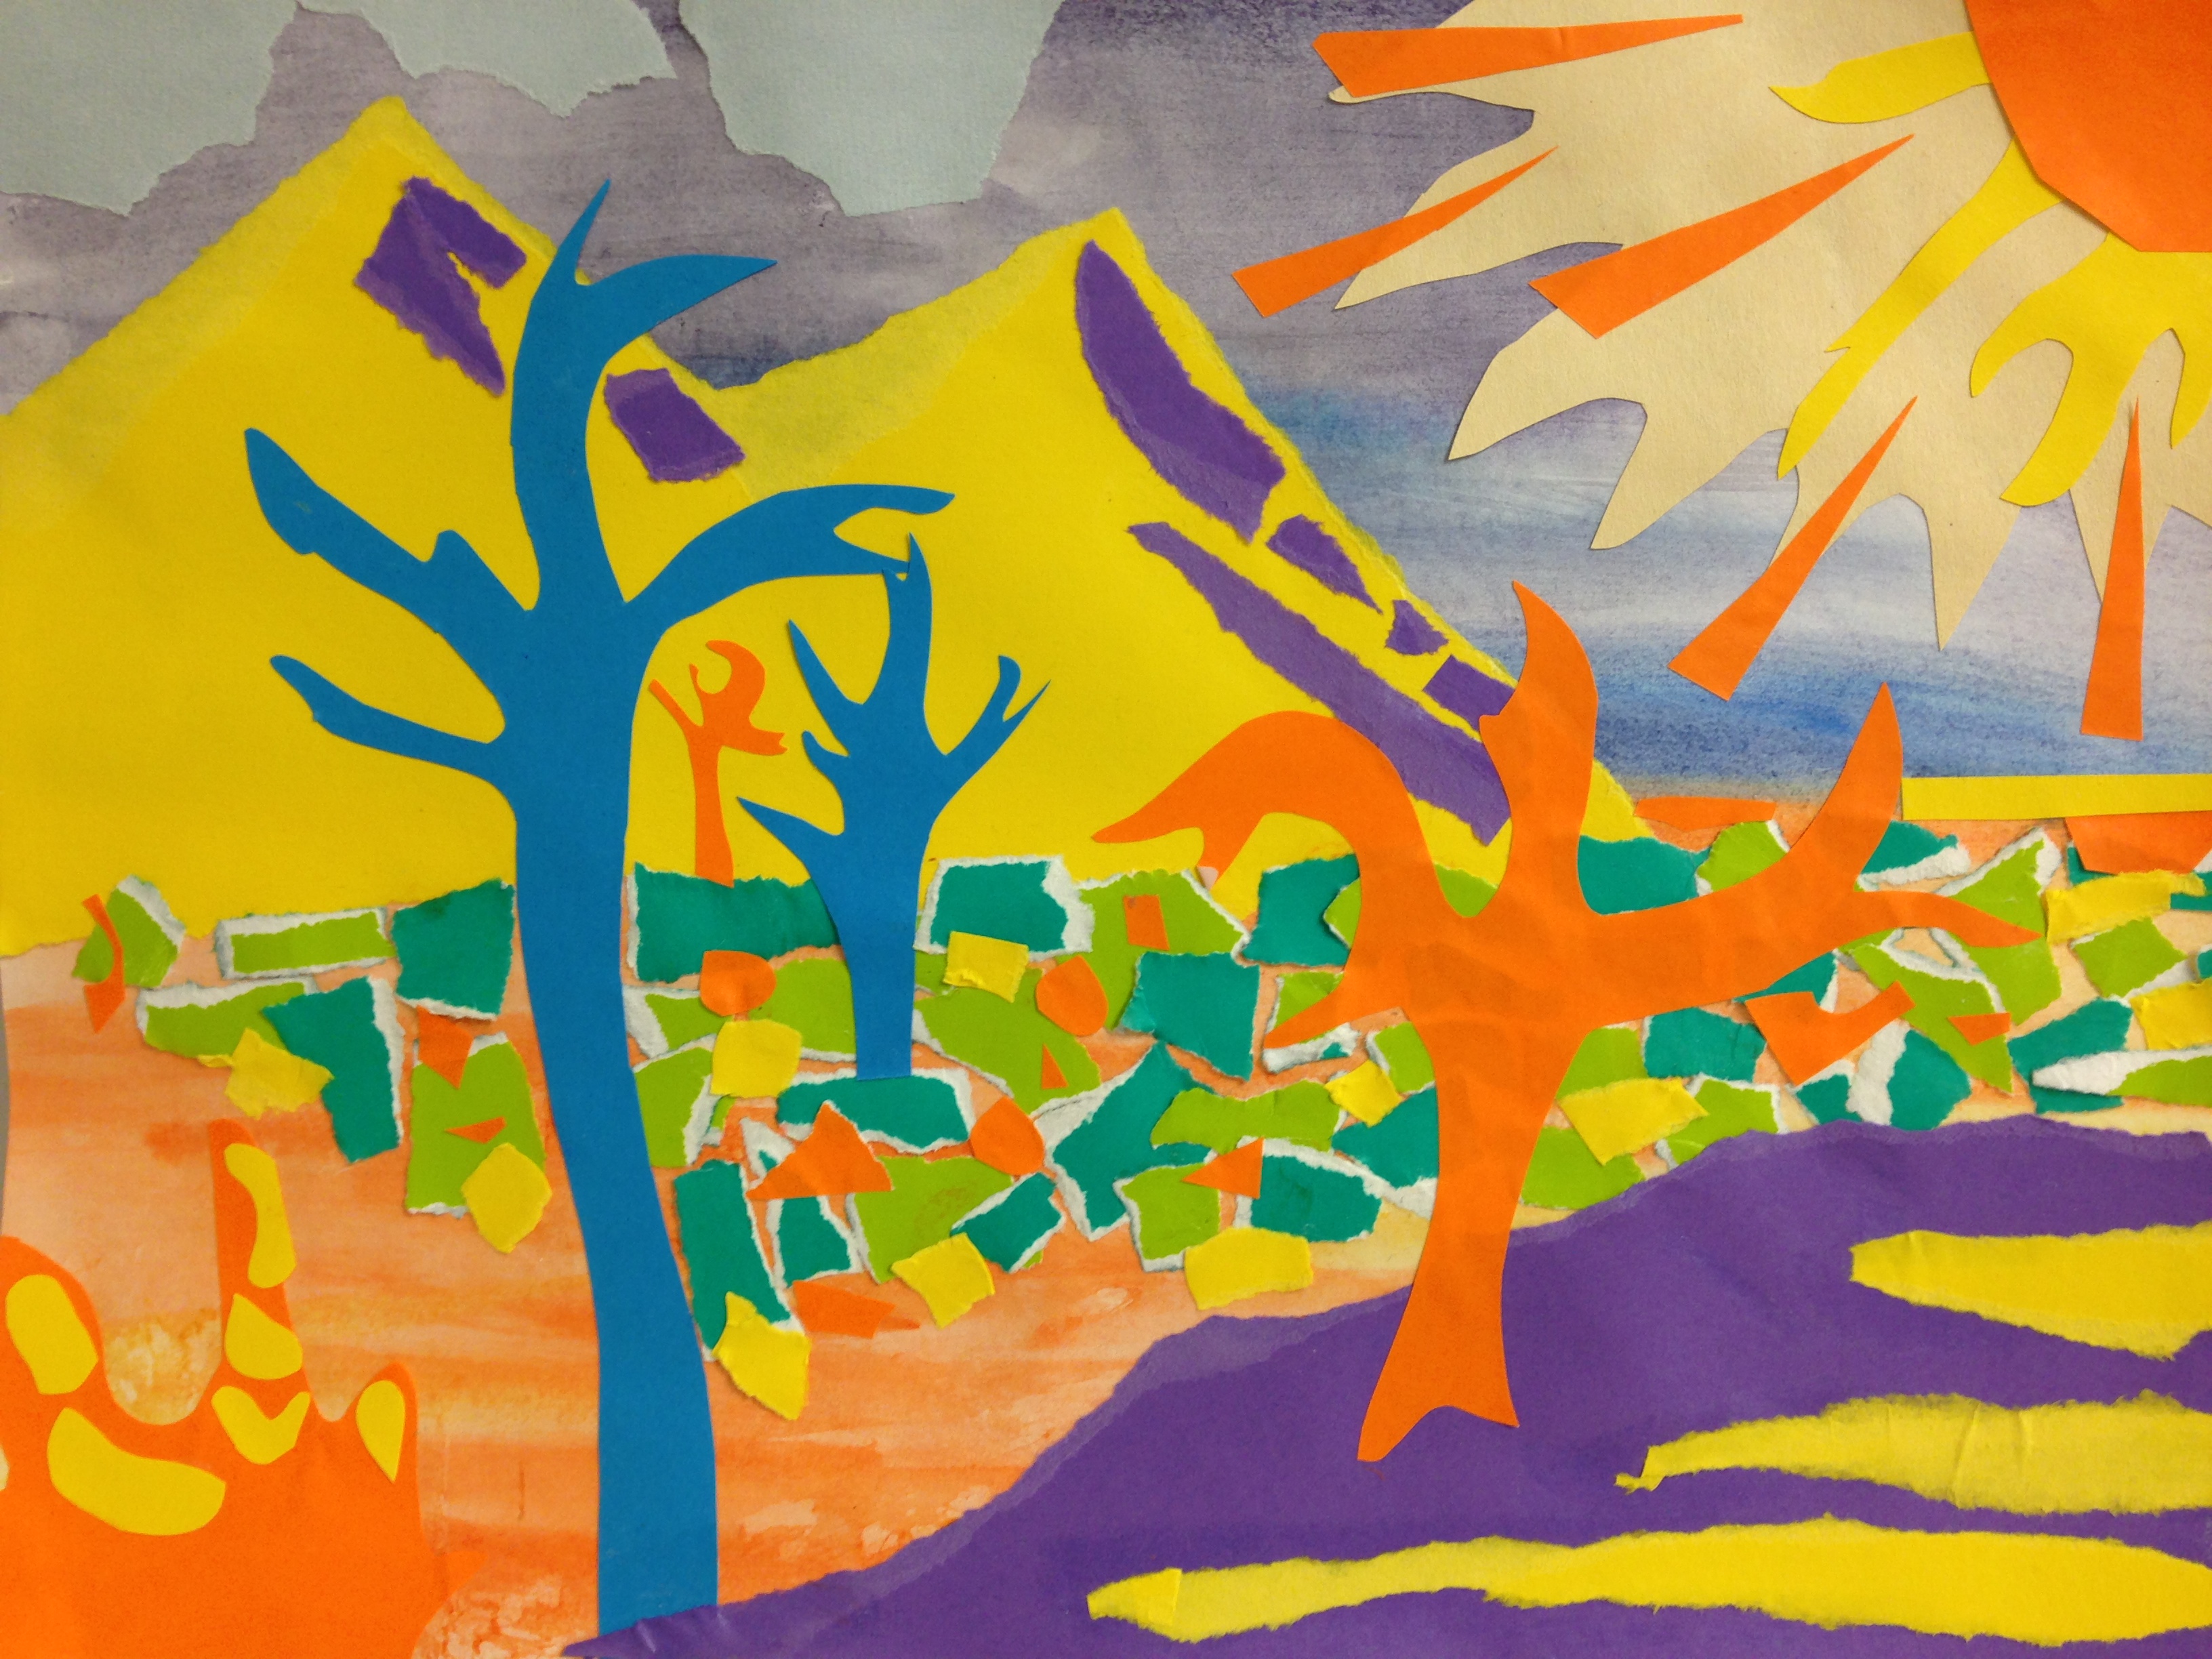 Collage of colorful trees in a colorful landscape